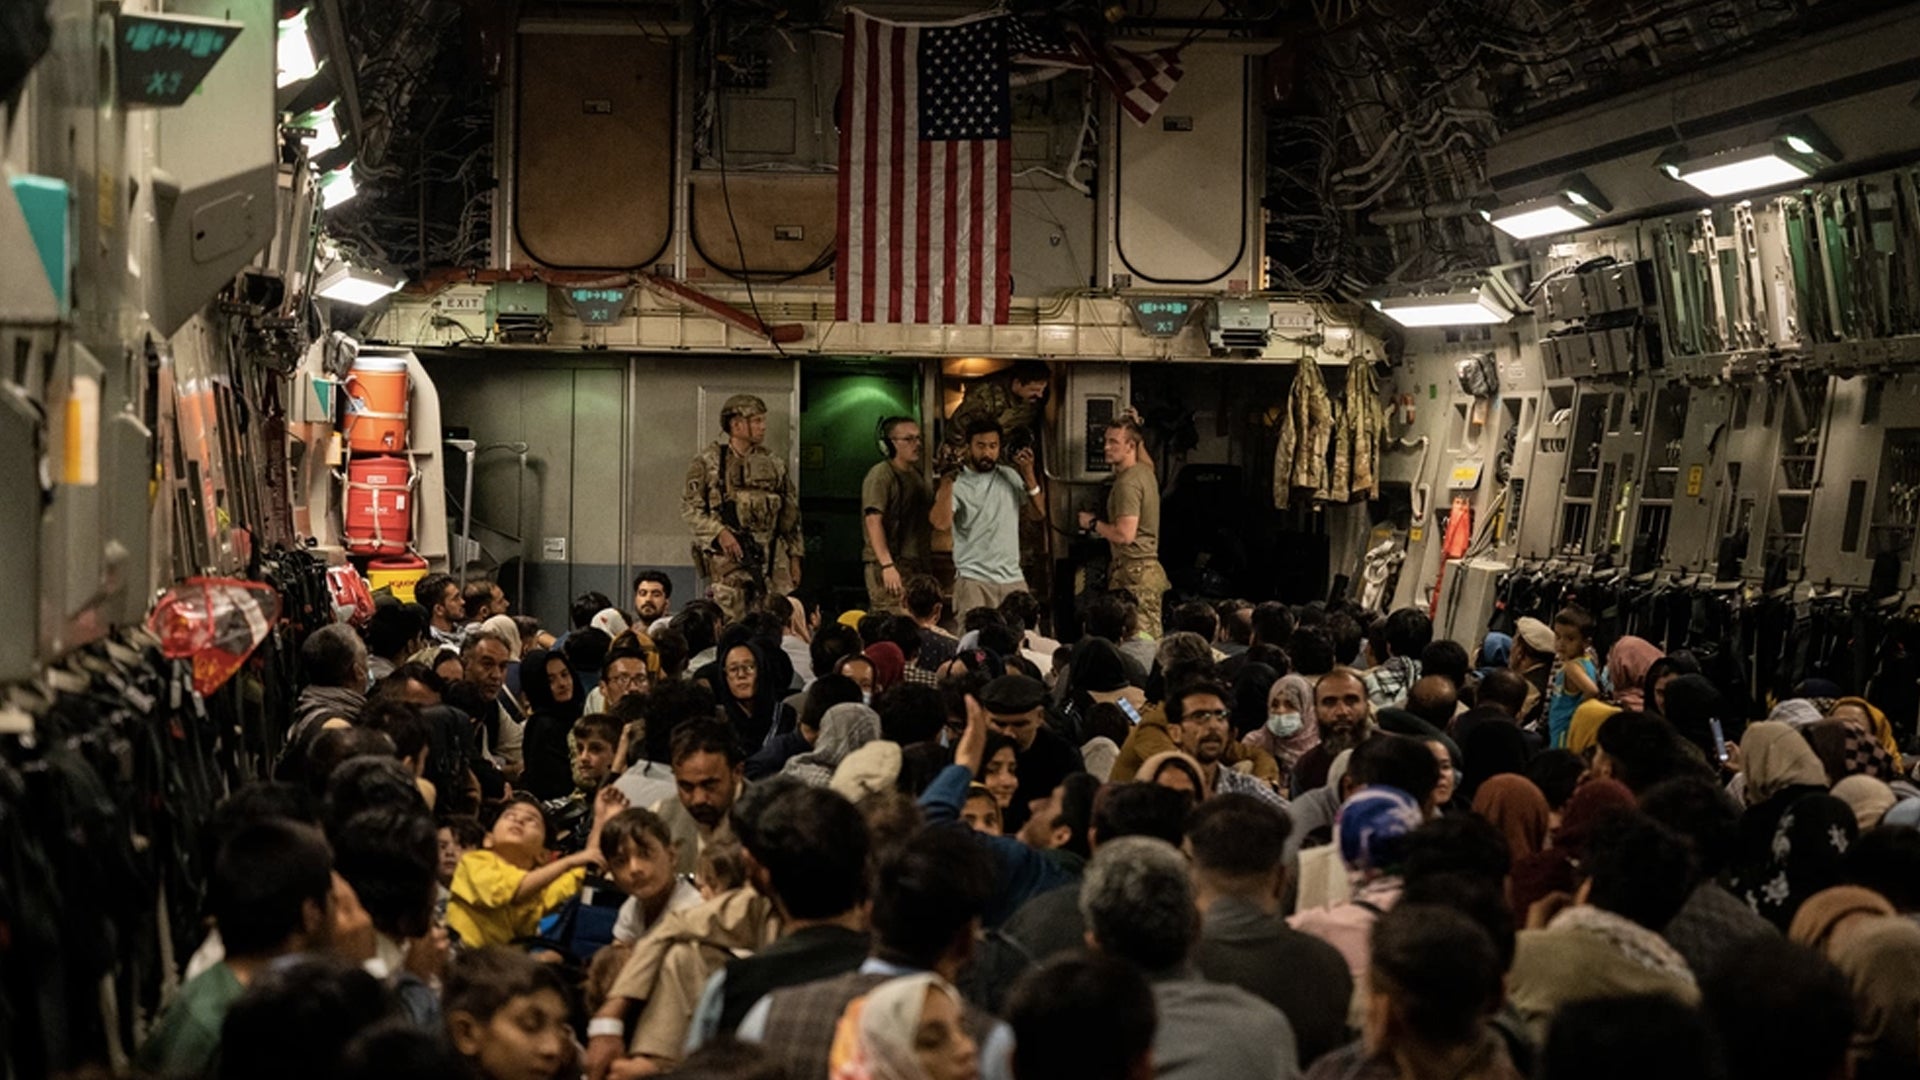 A view inside an Air Force C-17 transporting Afghan evacuees during Operation Allies Refuge. (Staff Sgt. Brandon Cribelar/U.S. Air Force)